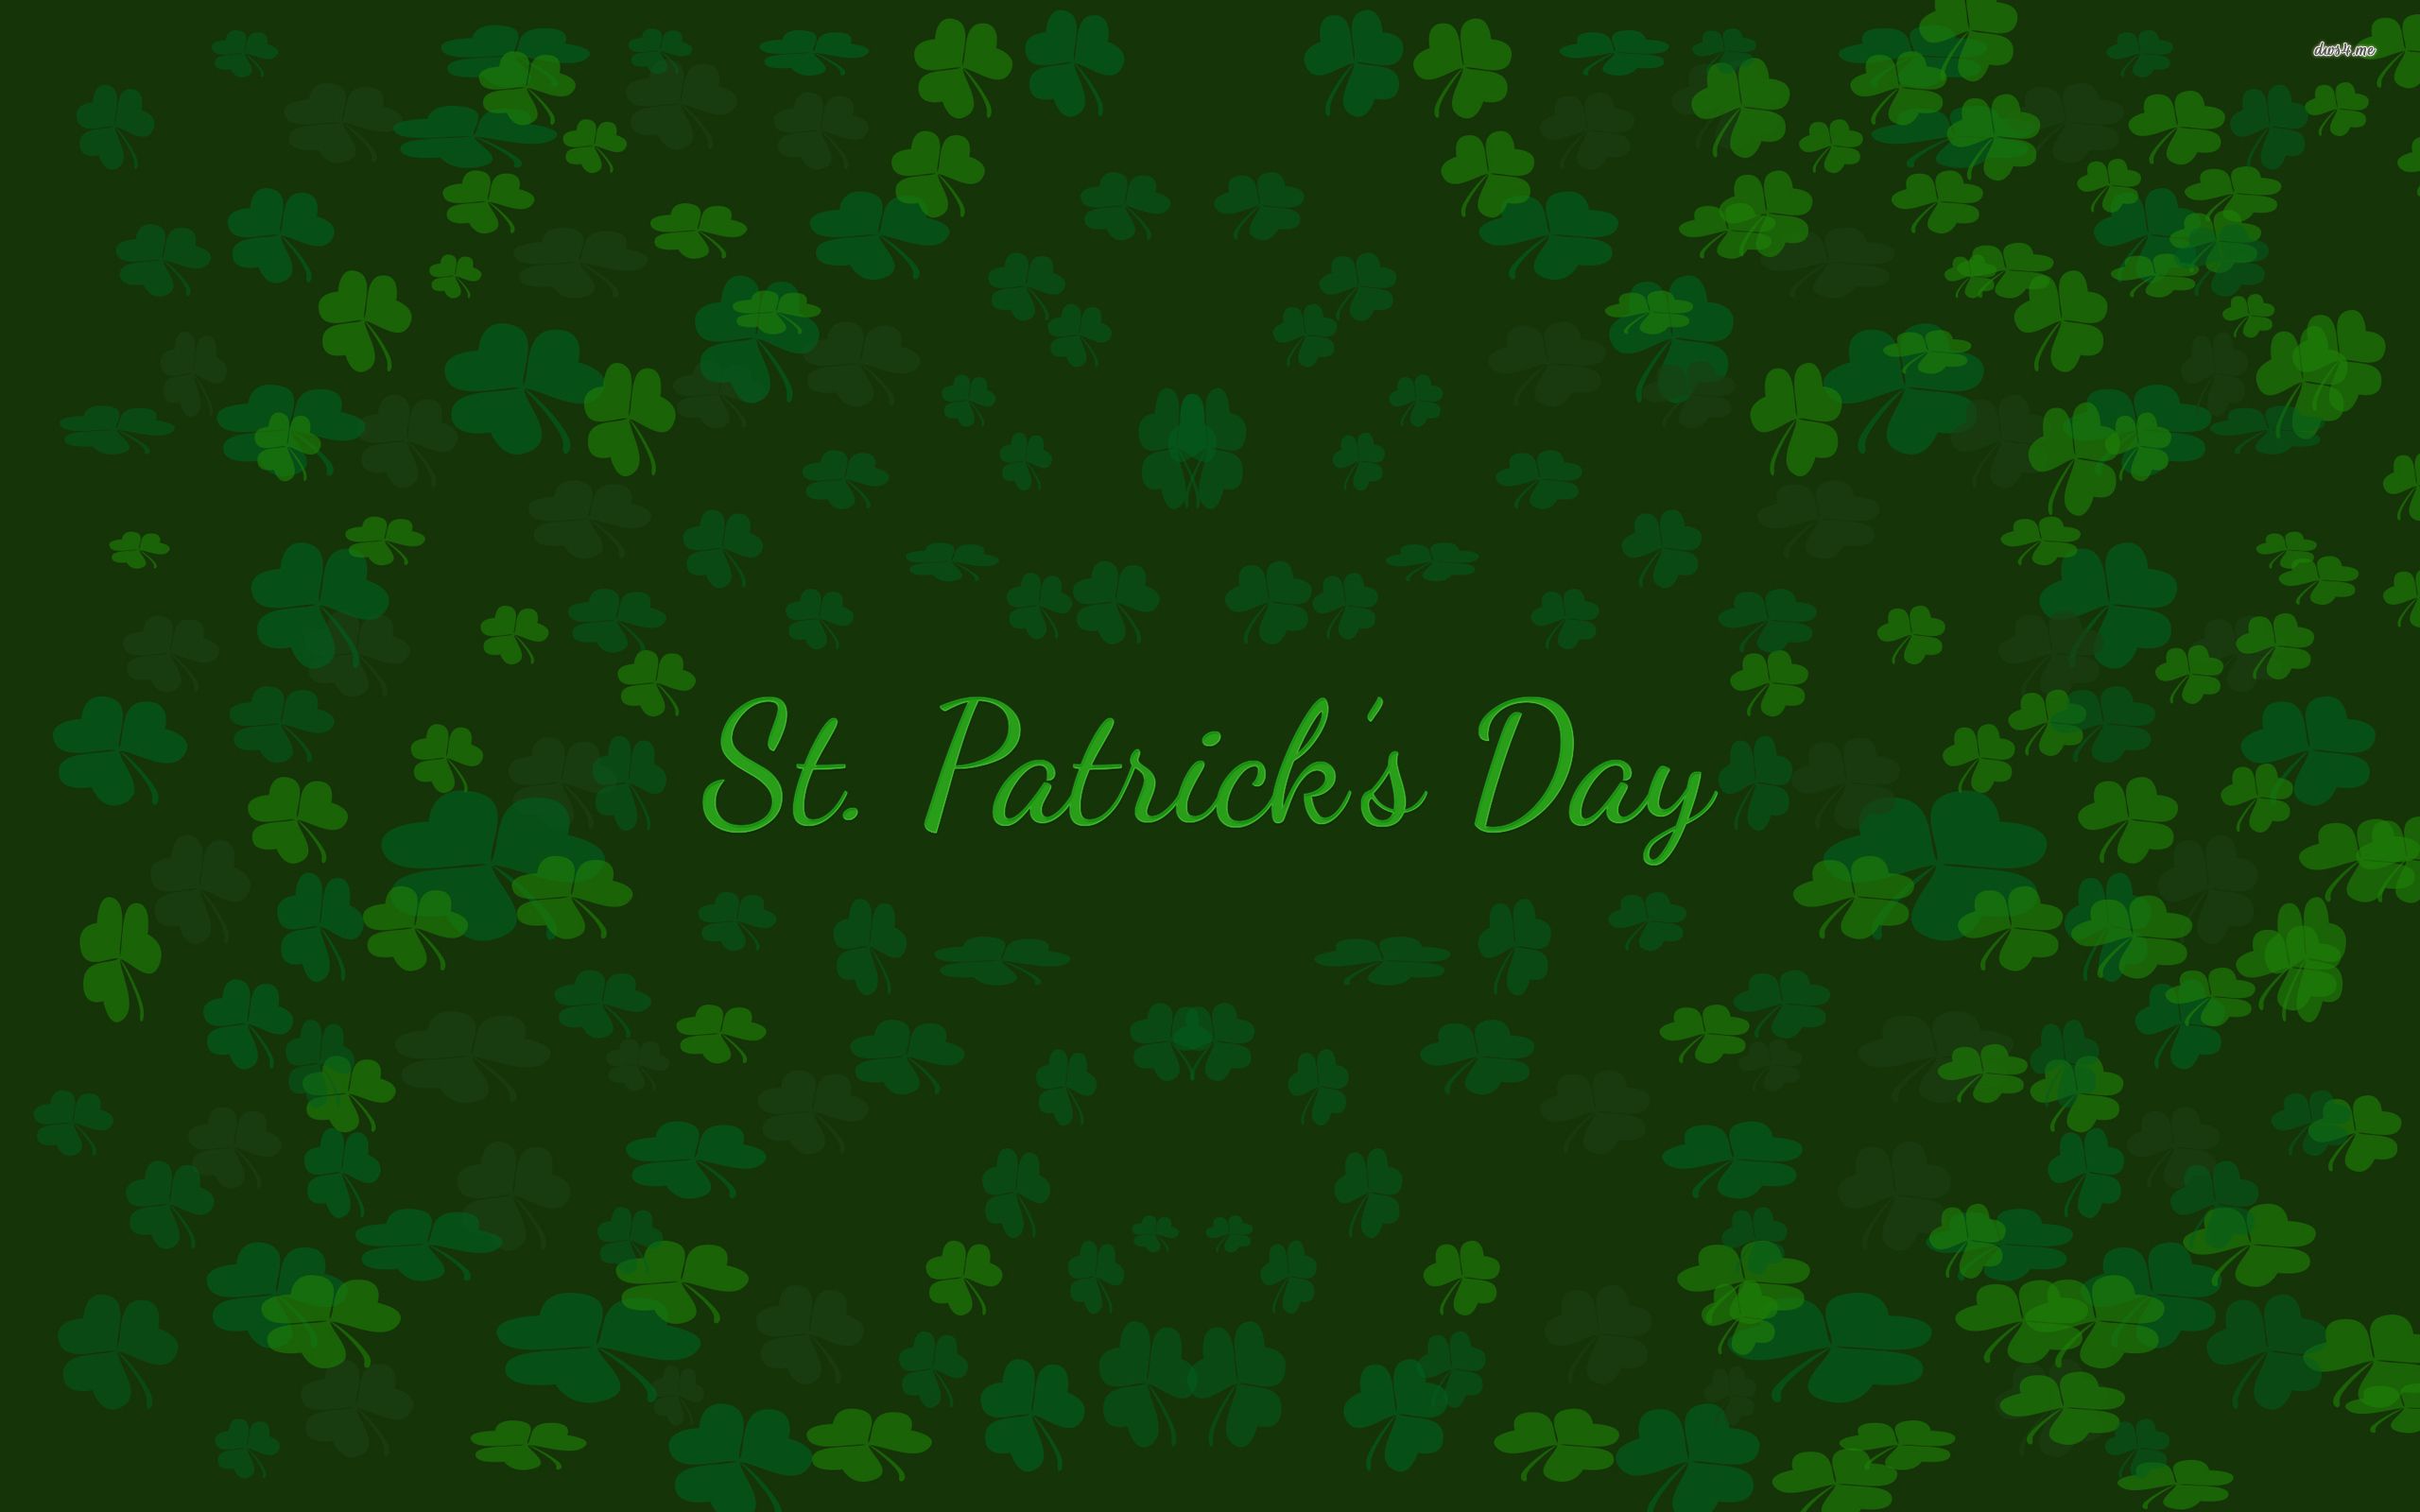 St. Patrick's Day wallpaper - Holiday wallpapers - #36603